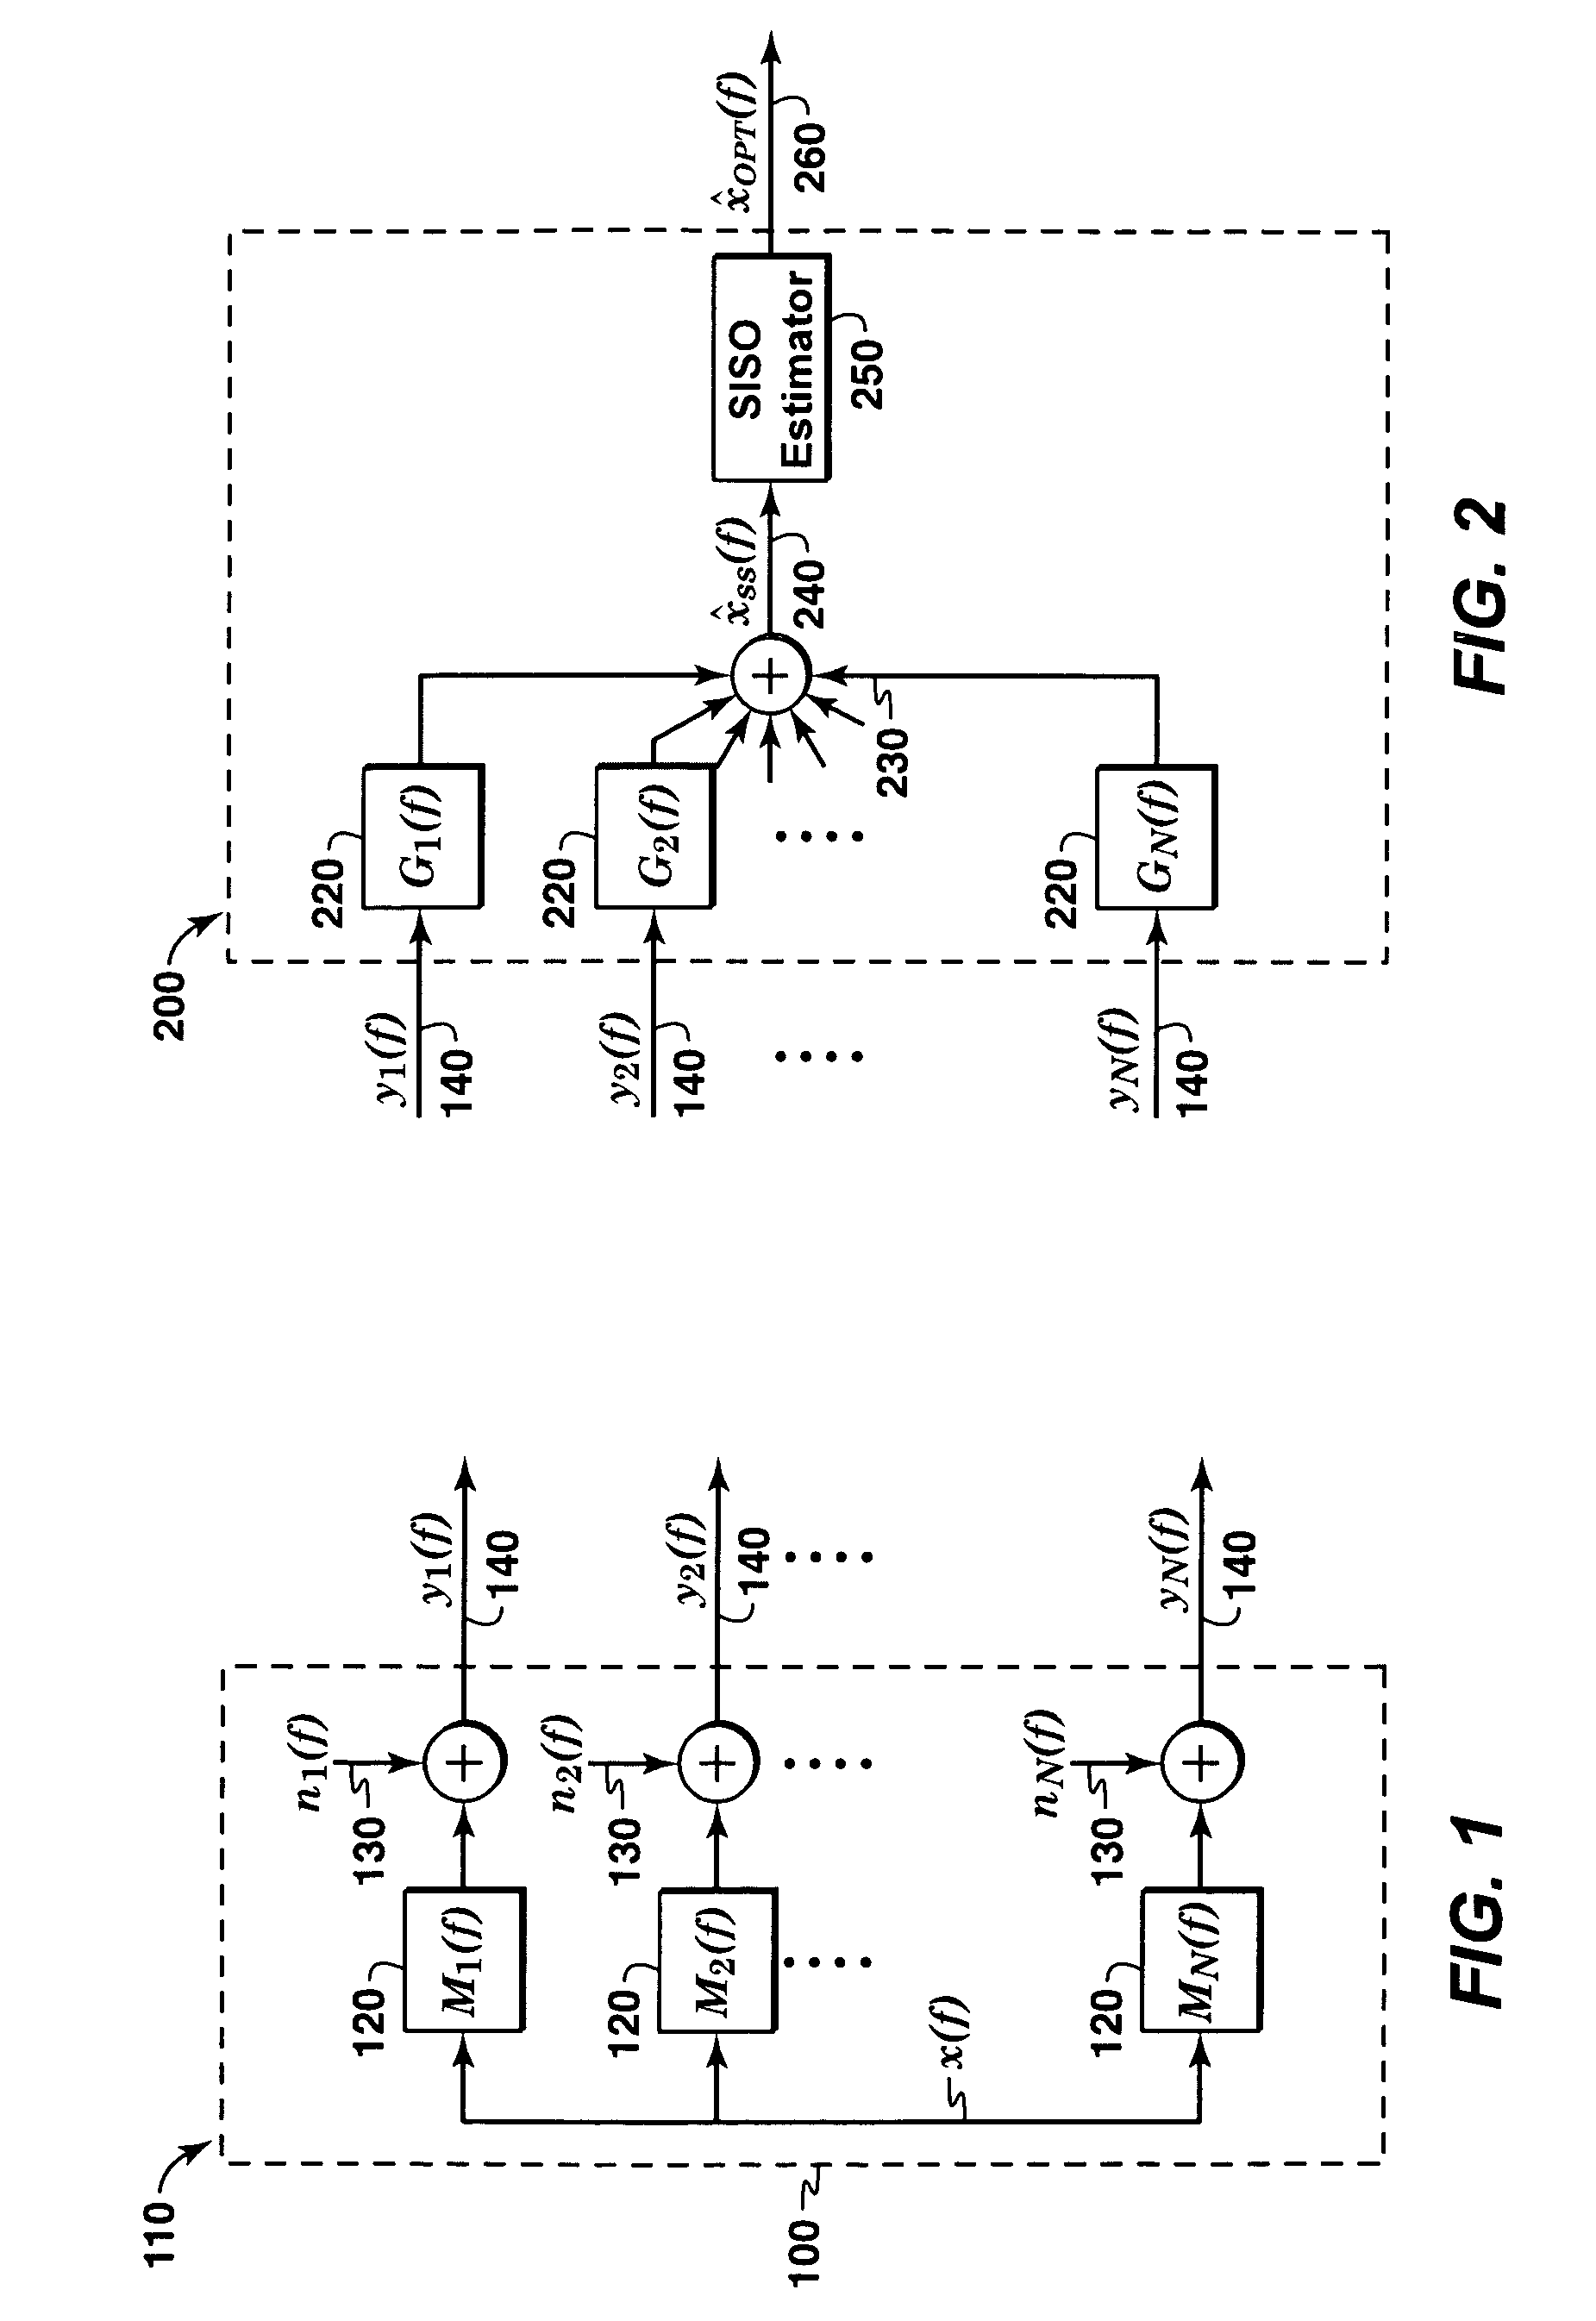 Method for combining seismic data sets